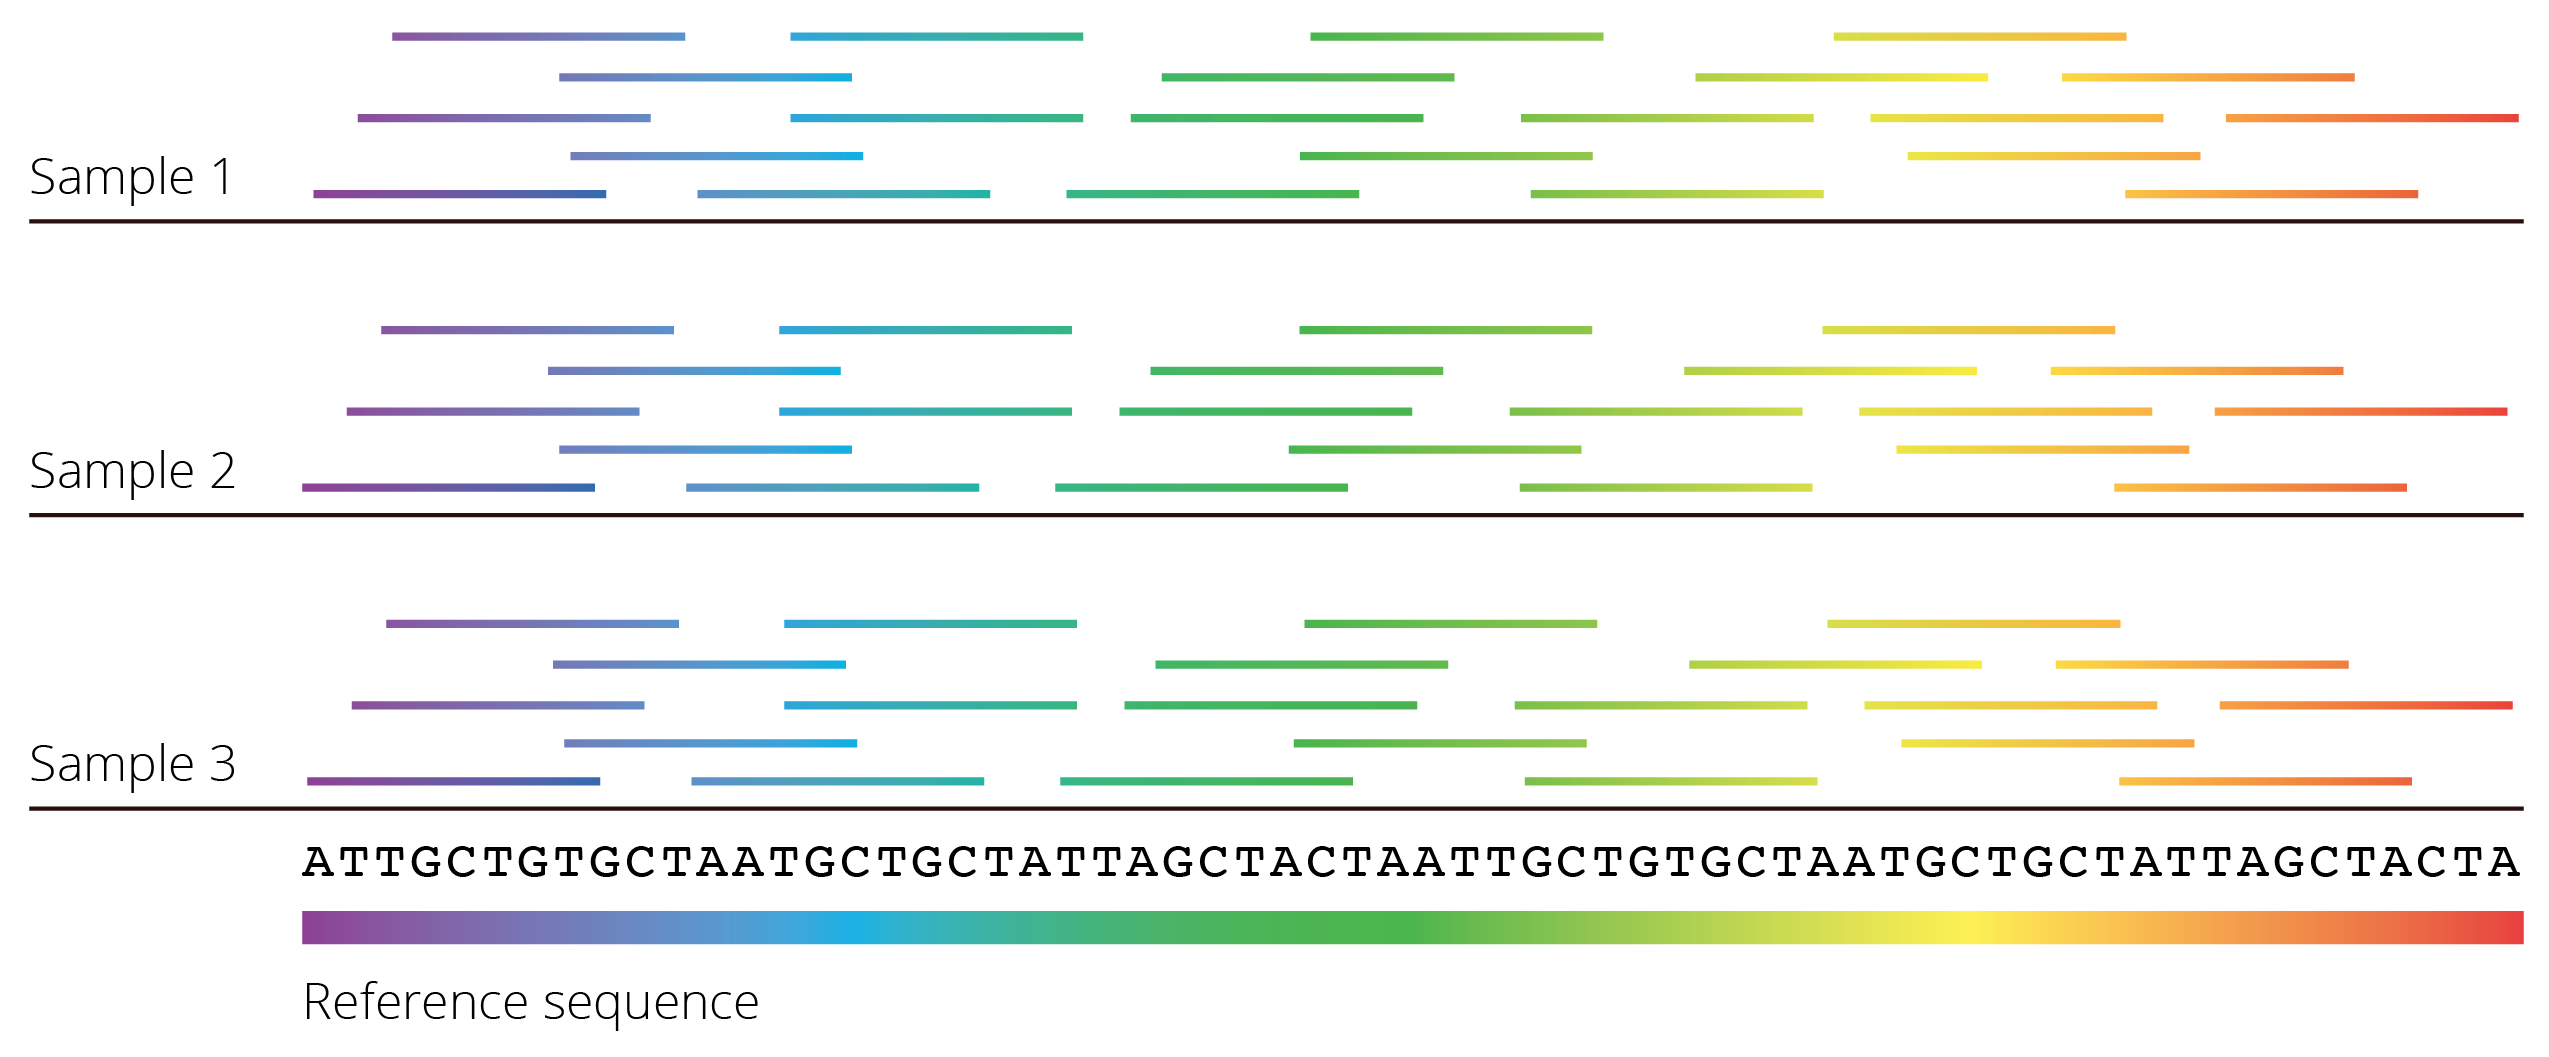 Most next-generation sequencing methods yield many short fragments of DNA sequences that were randomly amplified throughout the genome. To reconstruct the full DNA sequence, fragments can be mapped to a known reference sequence. If a reference is not available, overlap between individual fragments can be used to infer the DNA sequence of larger segments of the genome.